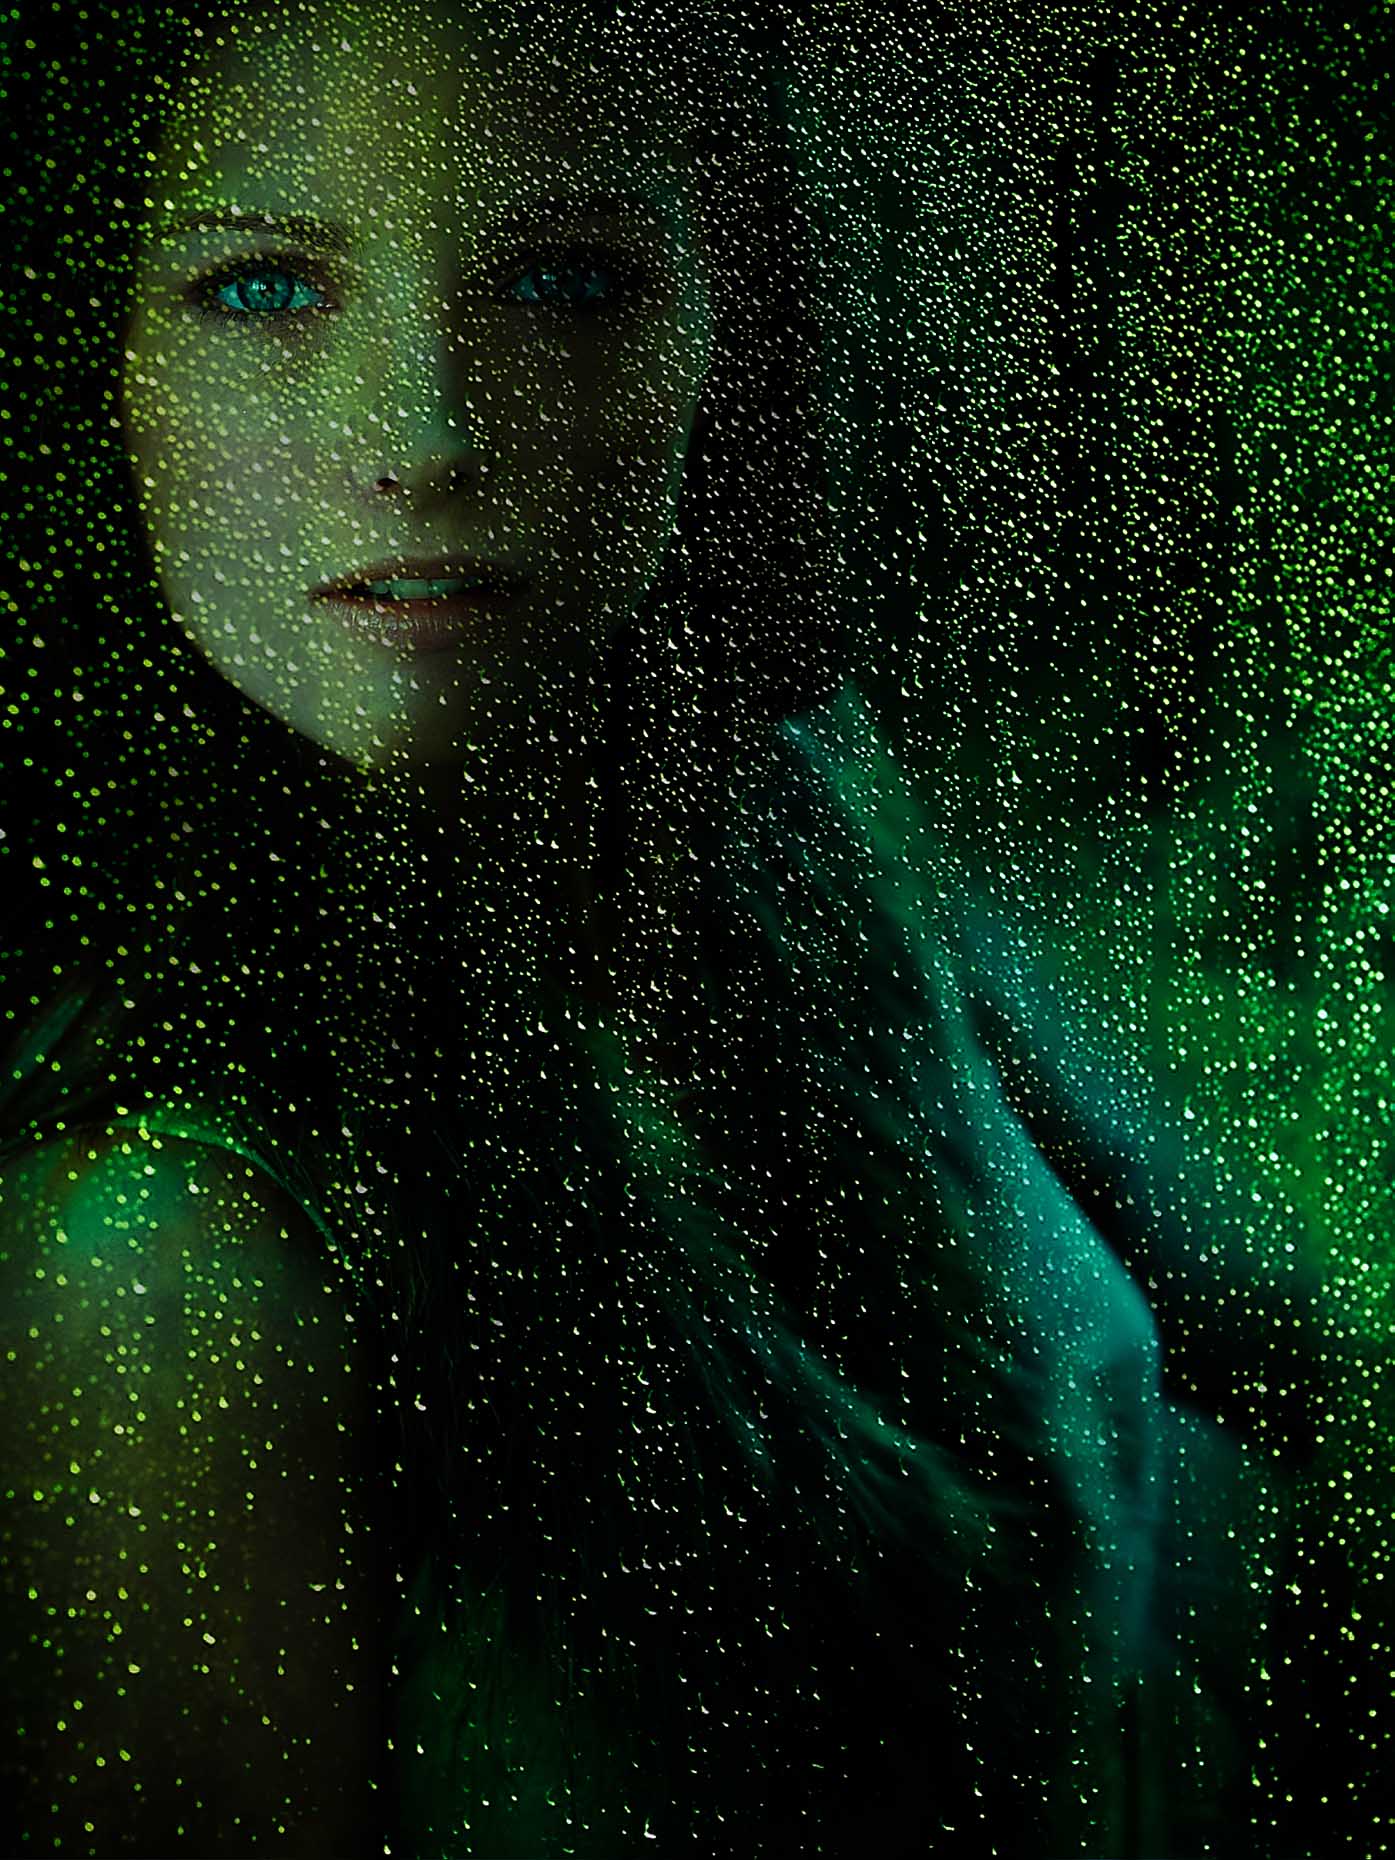 Female model behind green tinted glass with water droplets photographed by Marc Rogoff